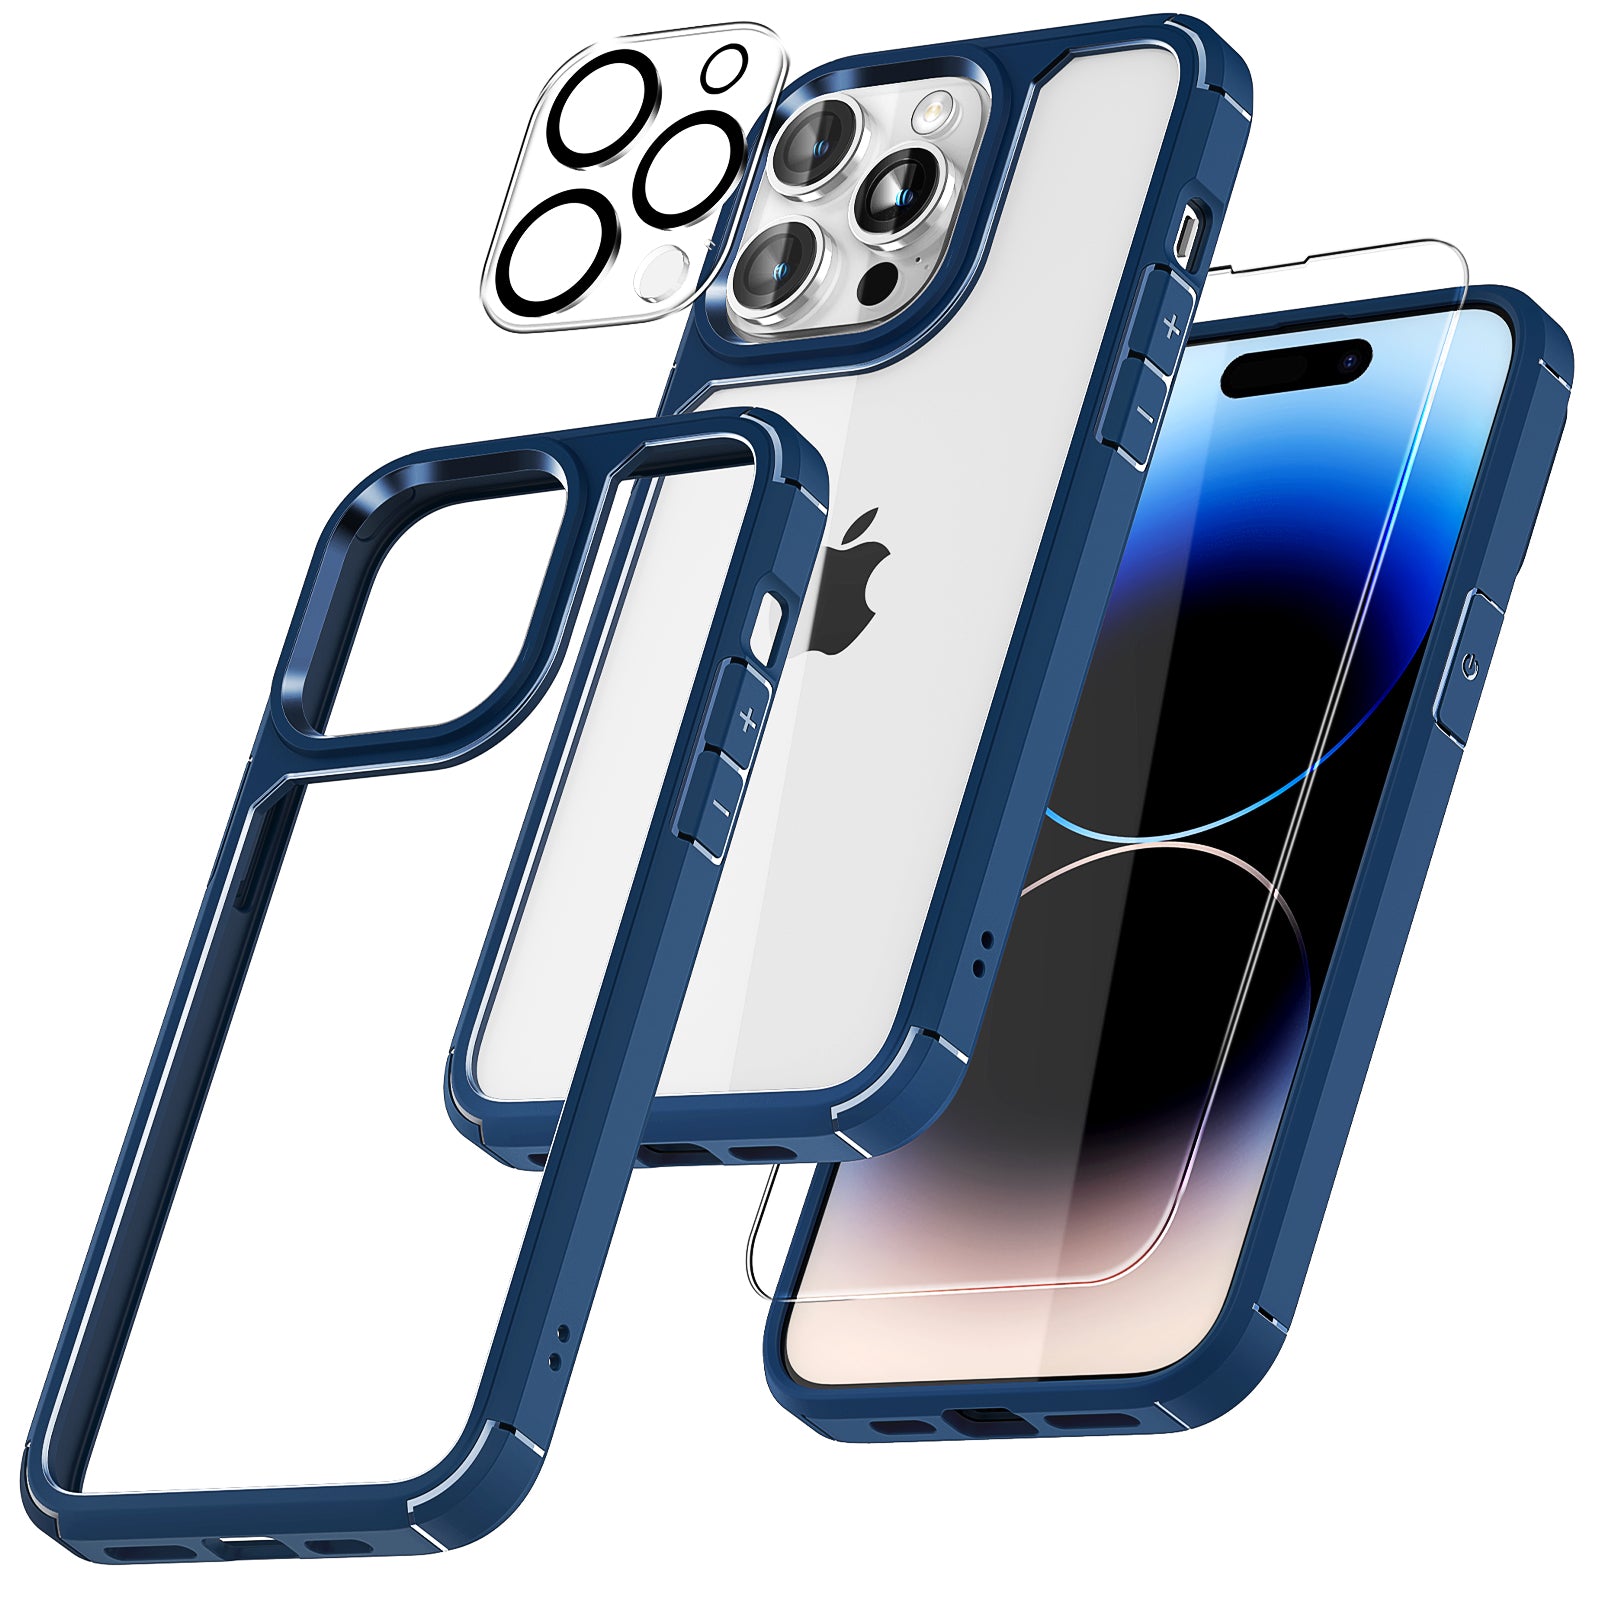  TAURI 5 in 1 Magnetic Case for iPhone 15 Pro Max [Military  Grade Drop Protection] with 2X Screen Protector + 2X Camera Lens Protector,  Transparent Slim Fit for iPhone 15 ProMax